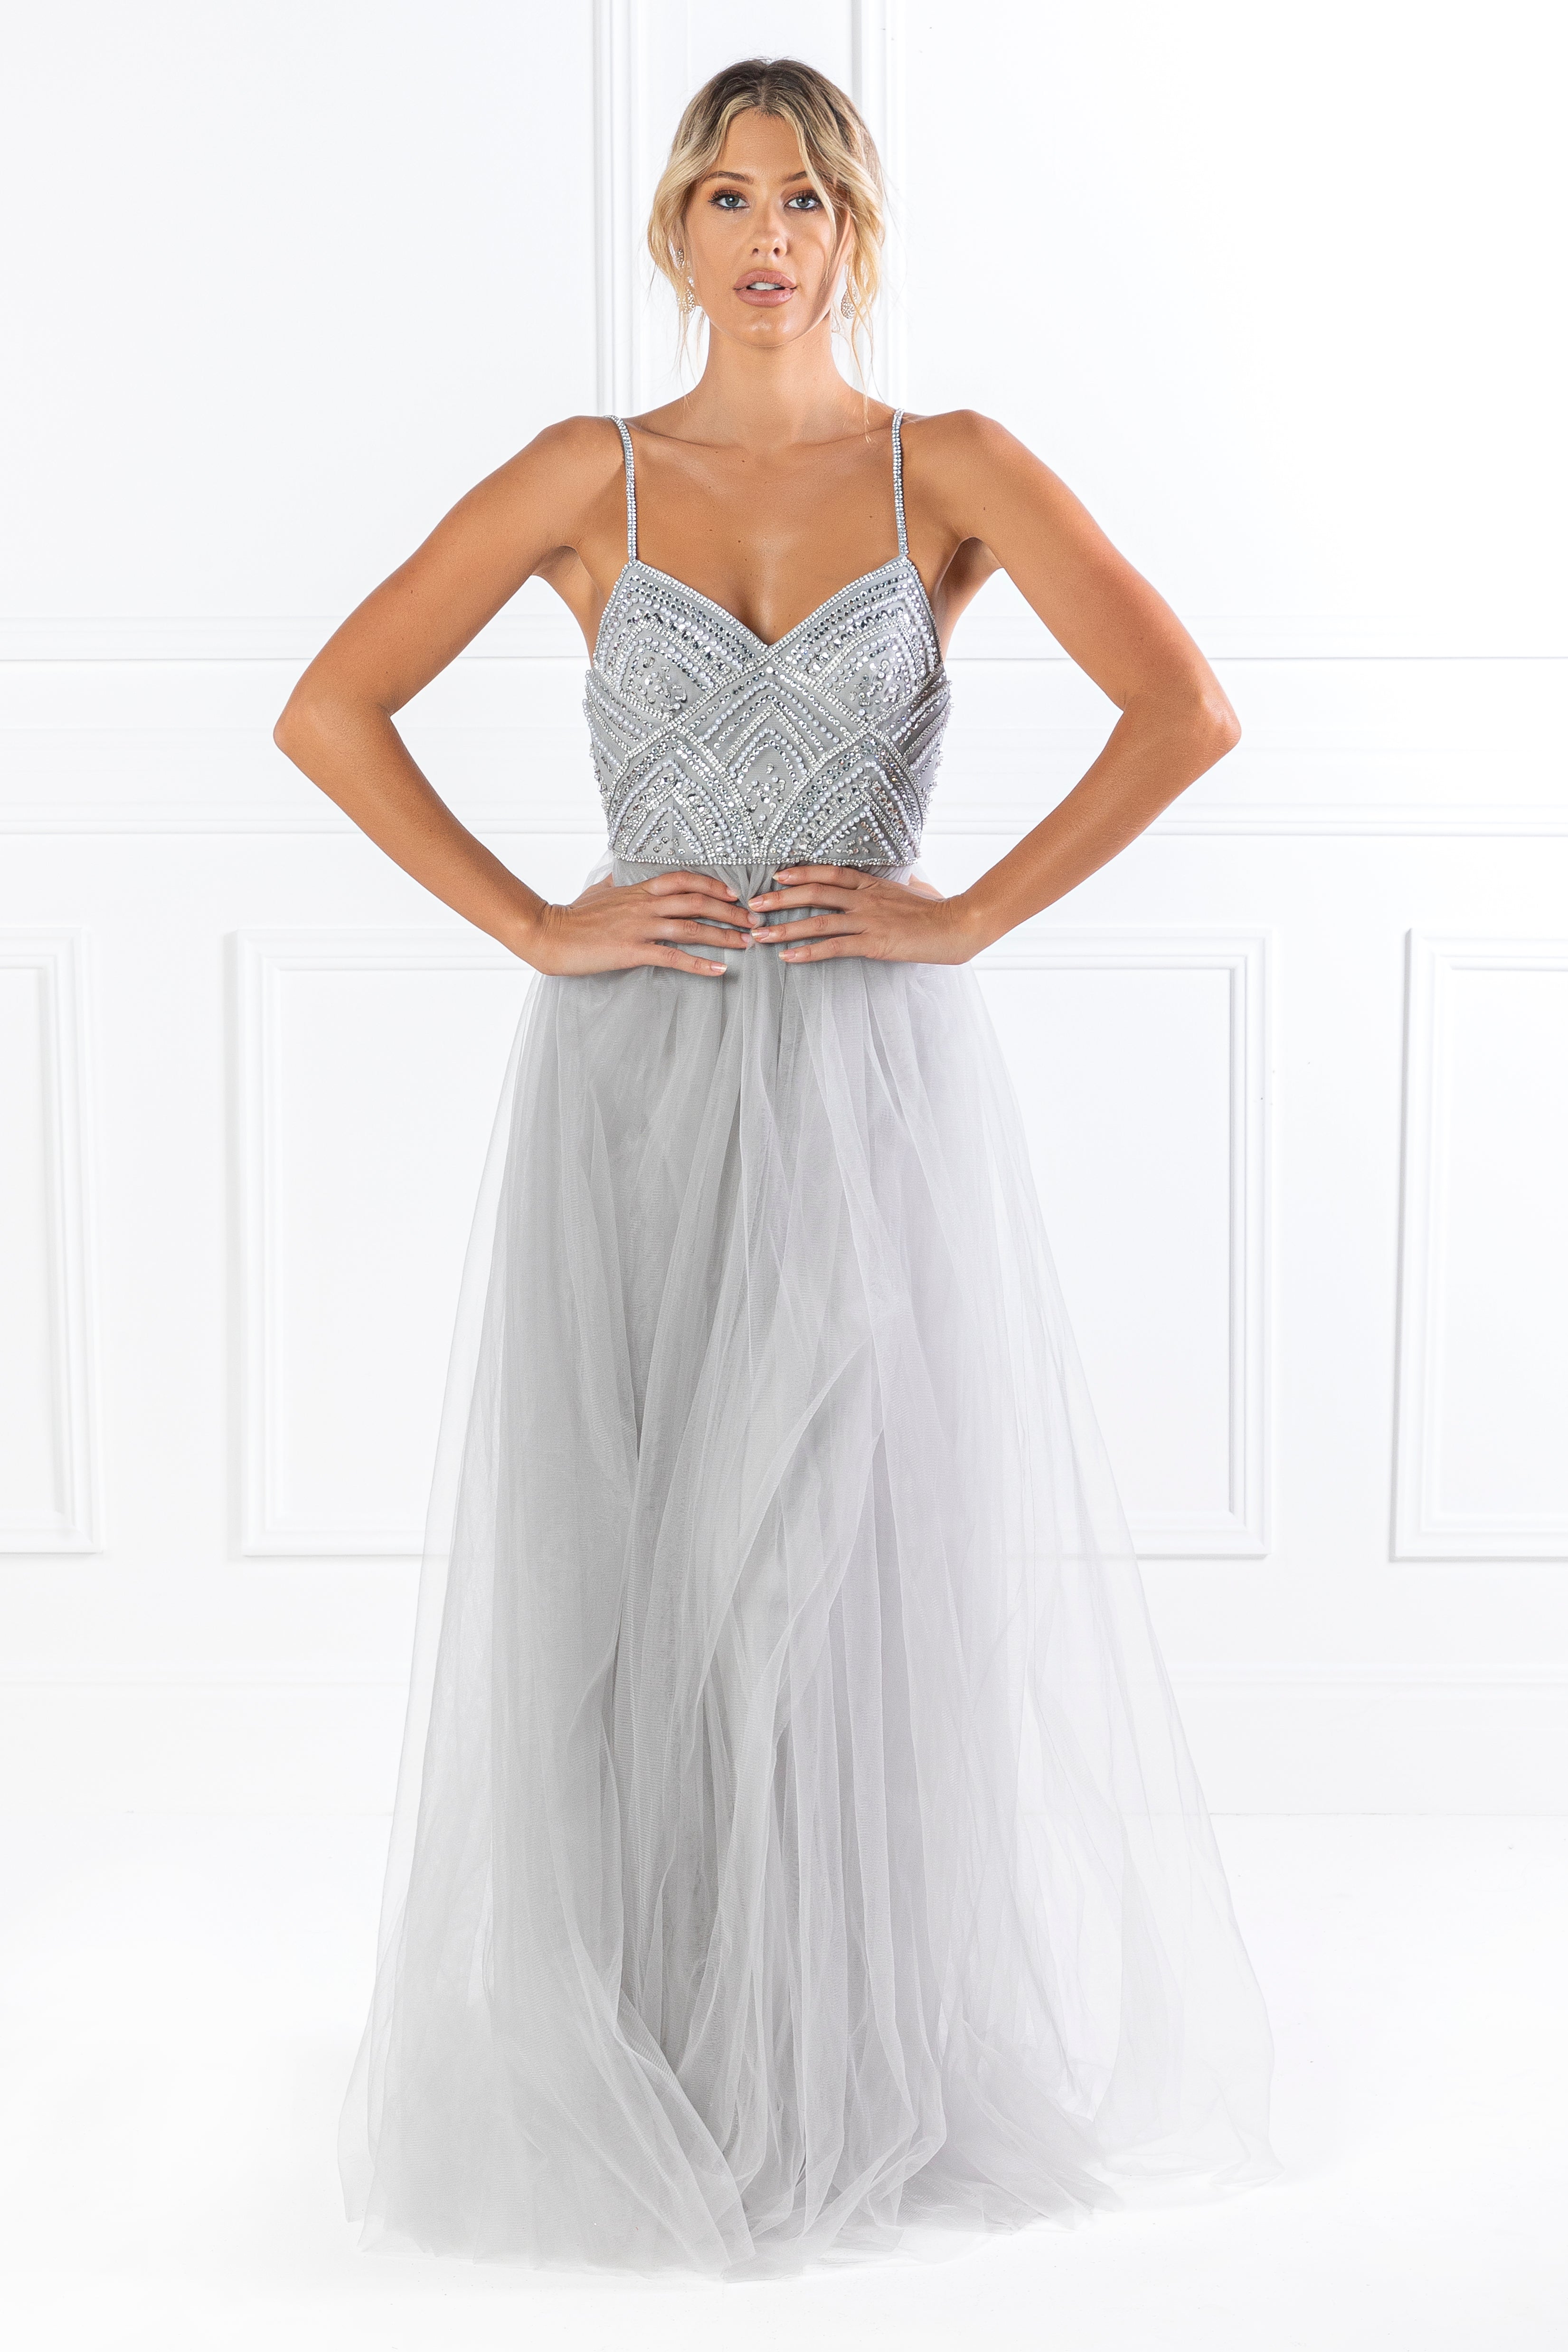 Honey Couture AINSLEY Grey Silver Crystal Beaded Tulle Formal Gown